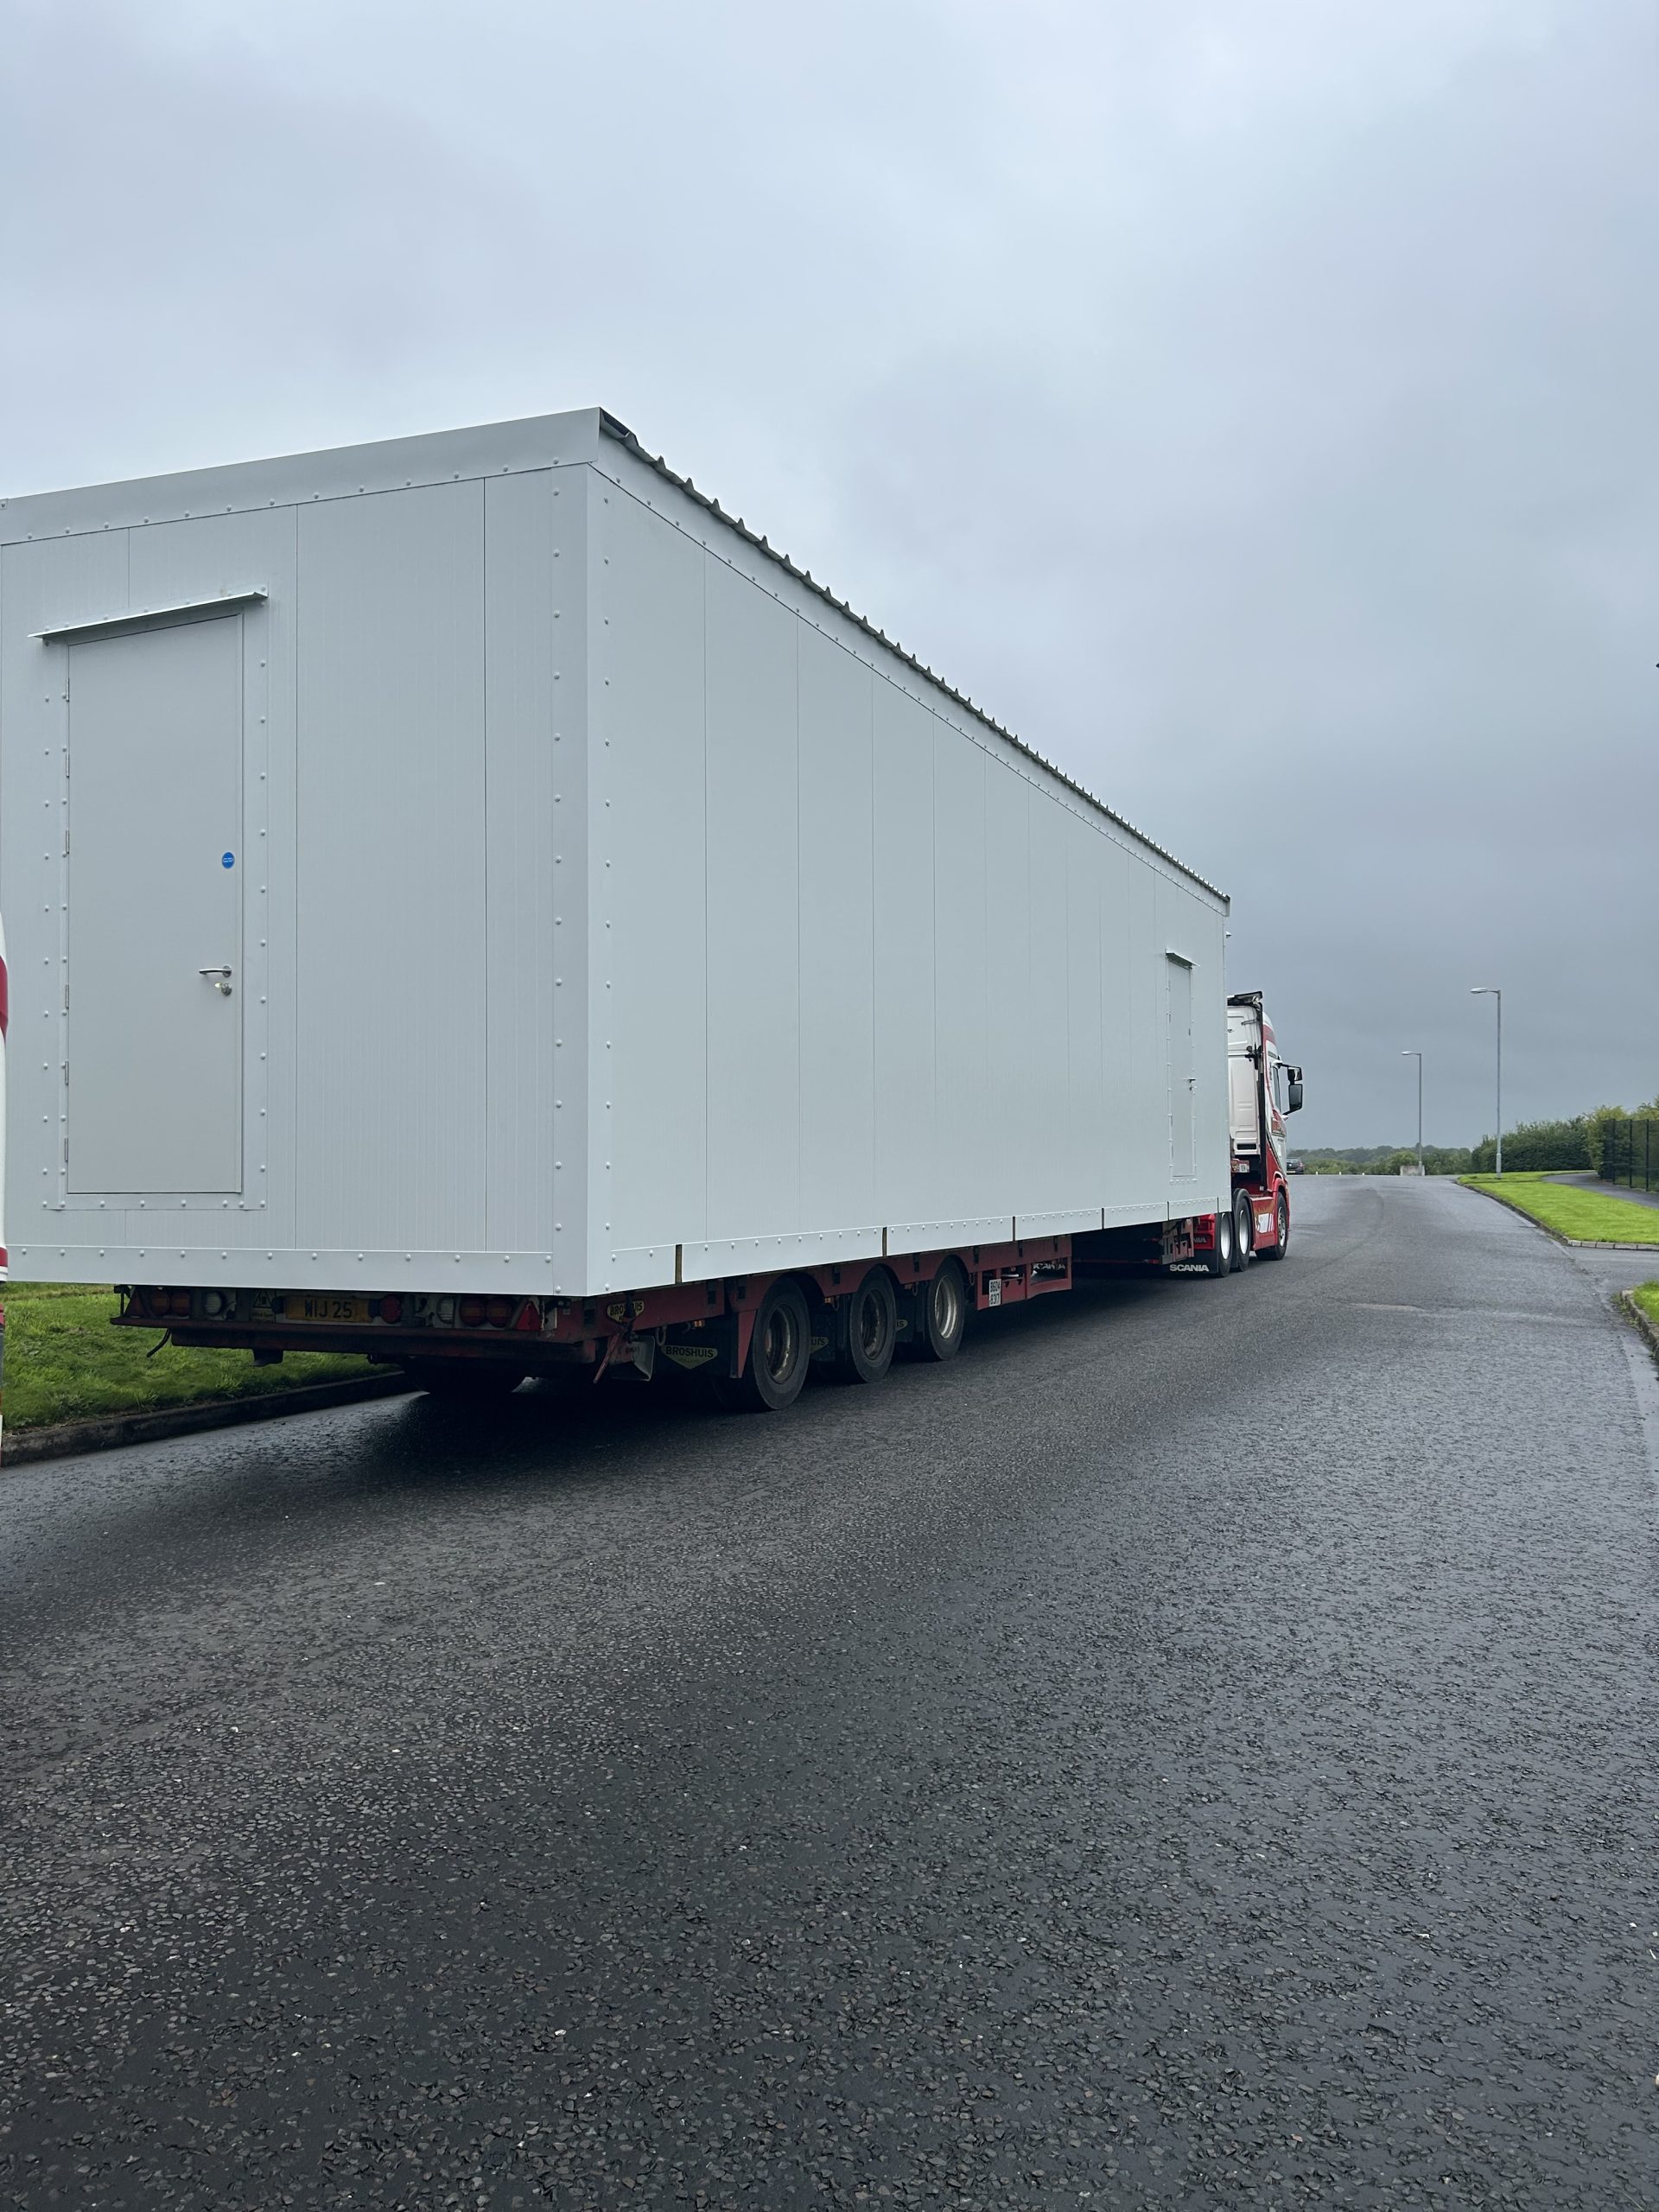 Modular data centre building on lorry bed